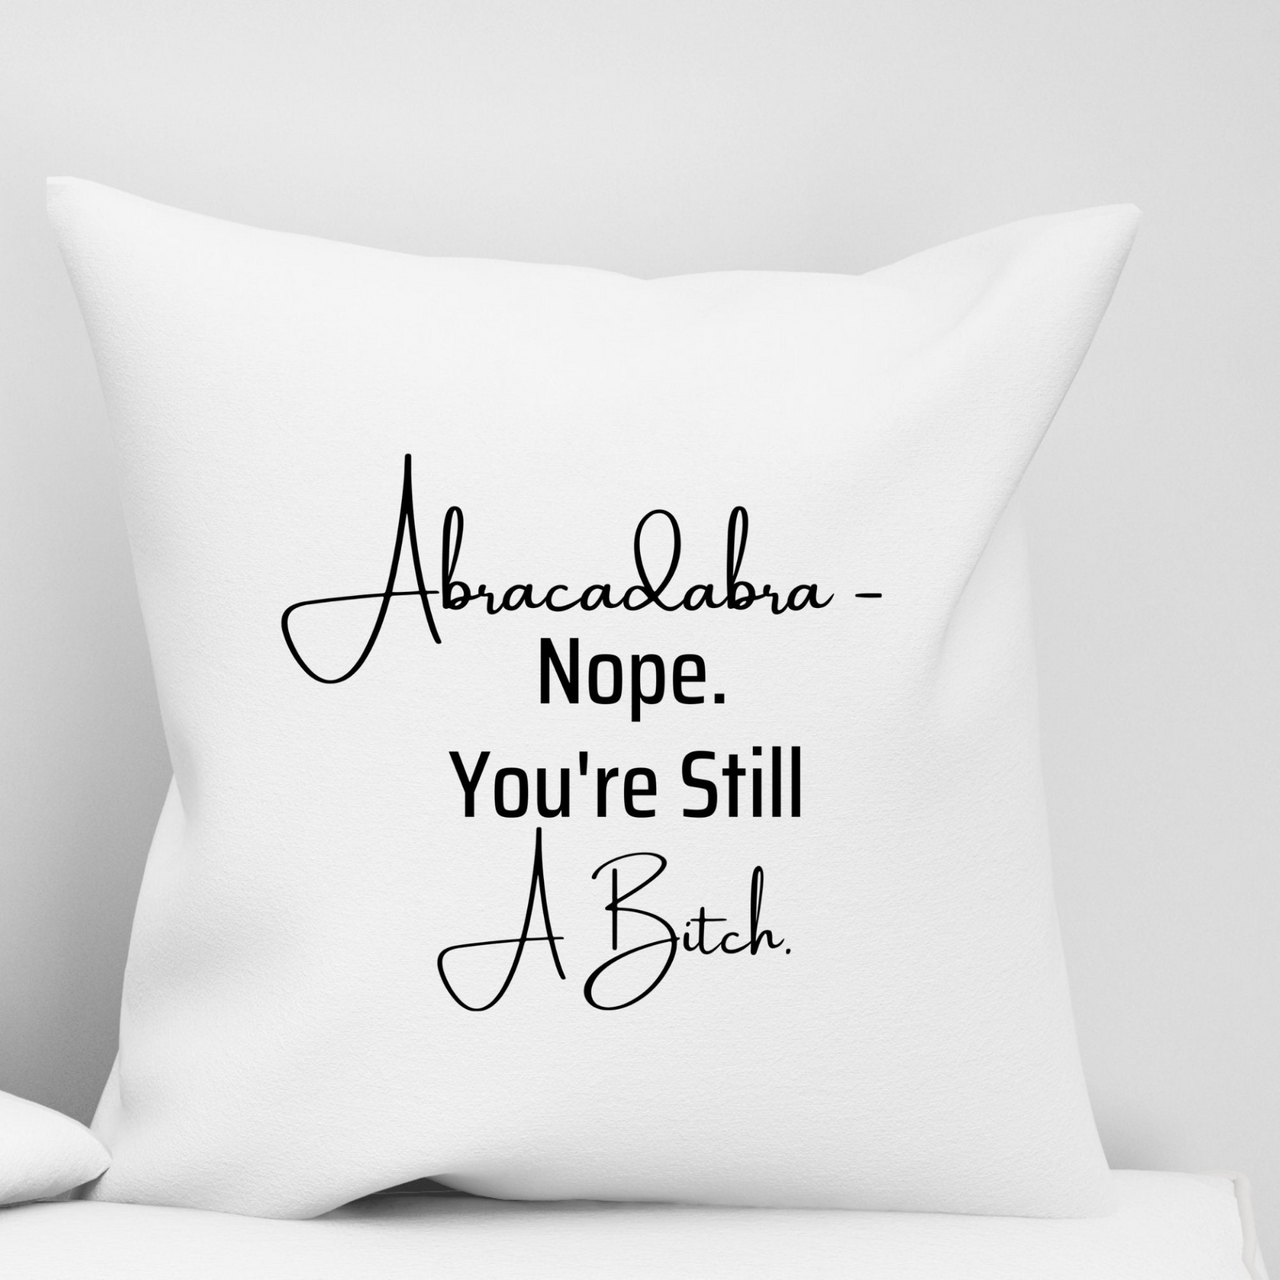 Abracadabra Nope You're Still A Bitch Couch Pillow Case | Funny Throw Pillow Cover with Sarcastic Quote | Decorative Pillow For Housewarming